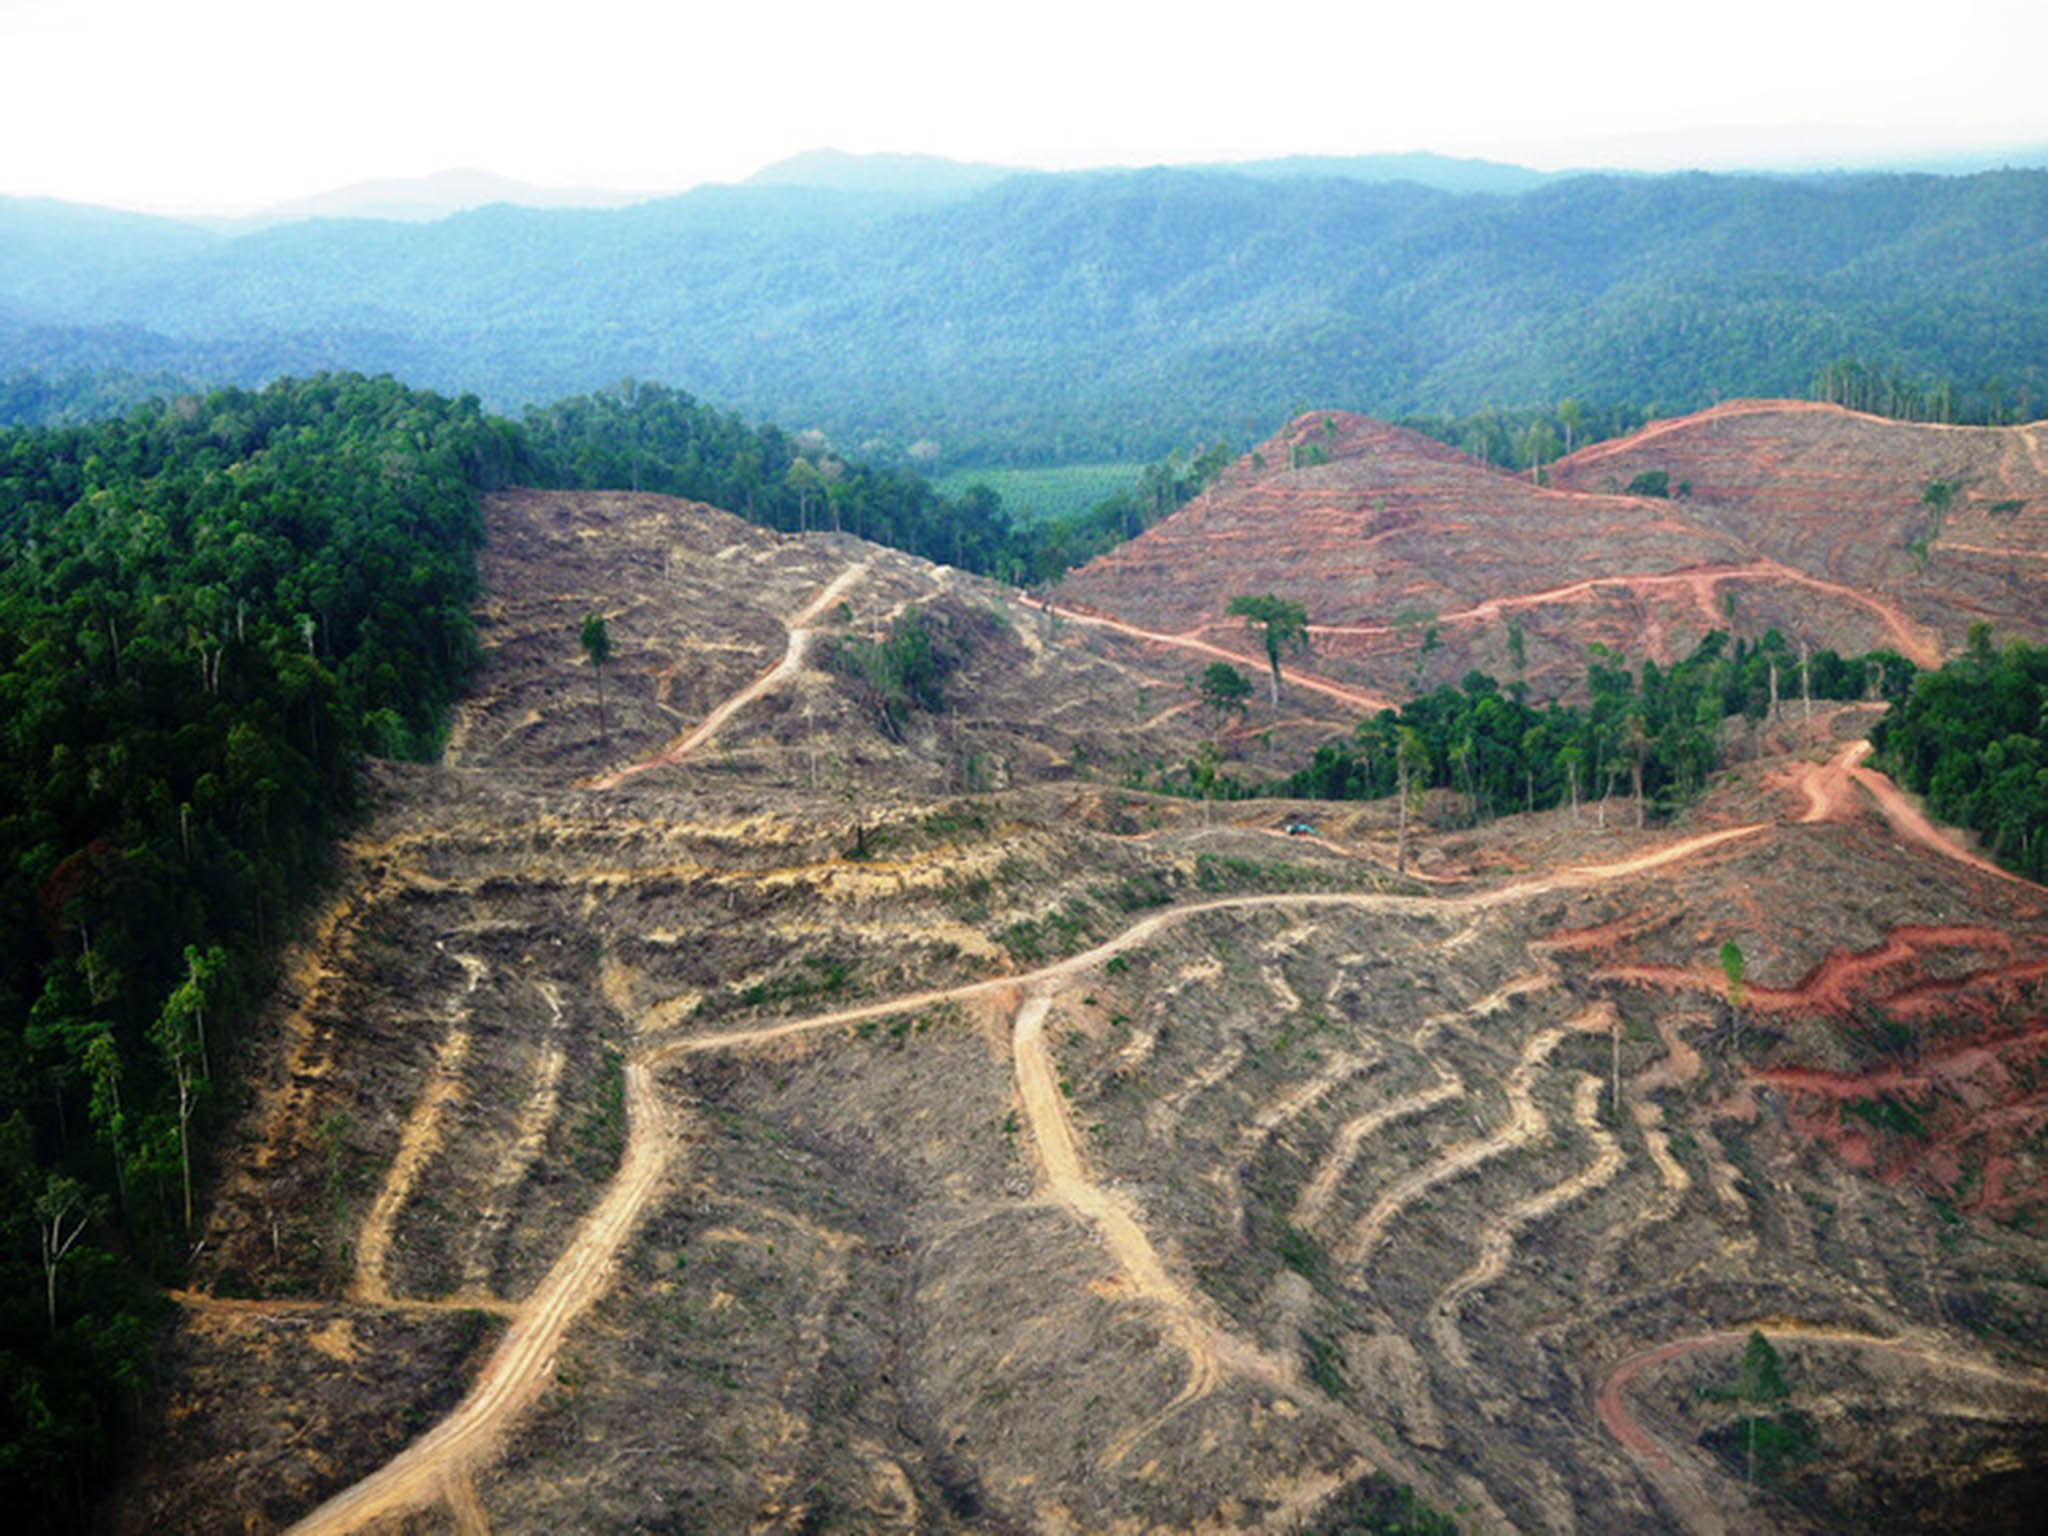 Deforestation in Sumatra, one of the world’s primate hotspots